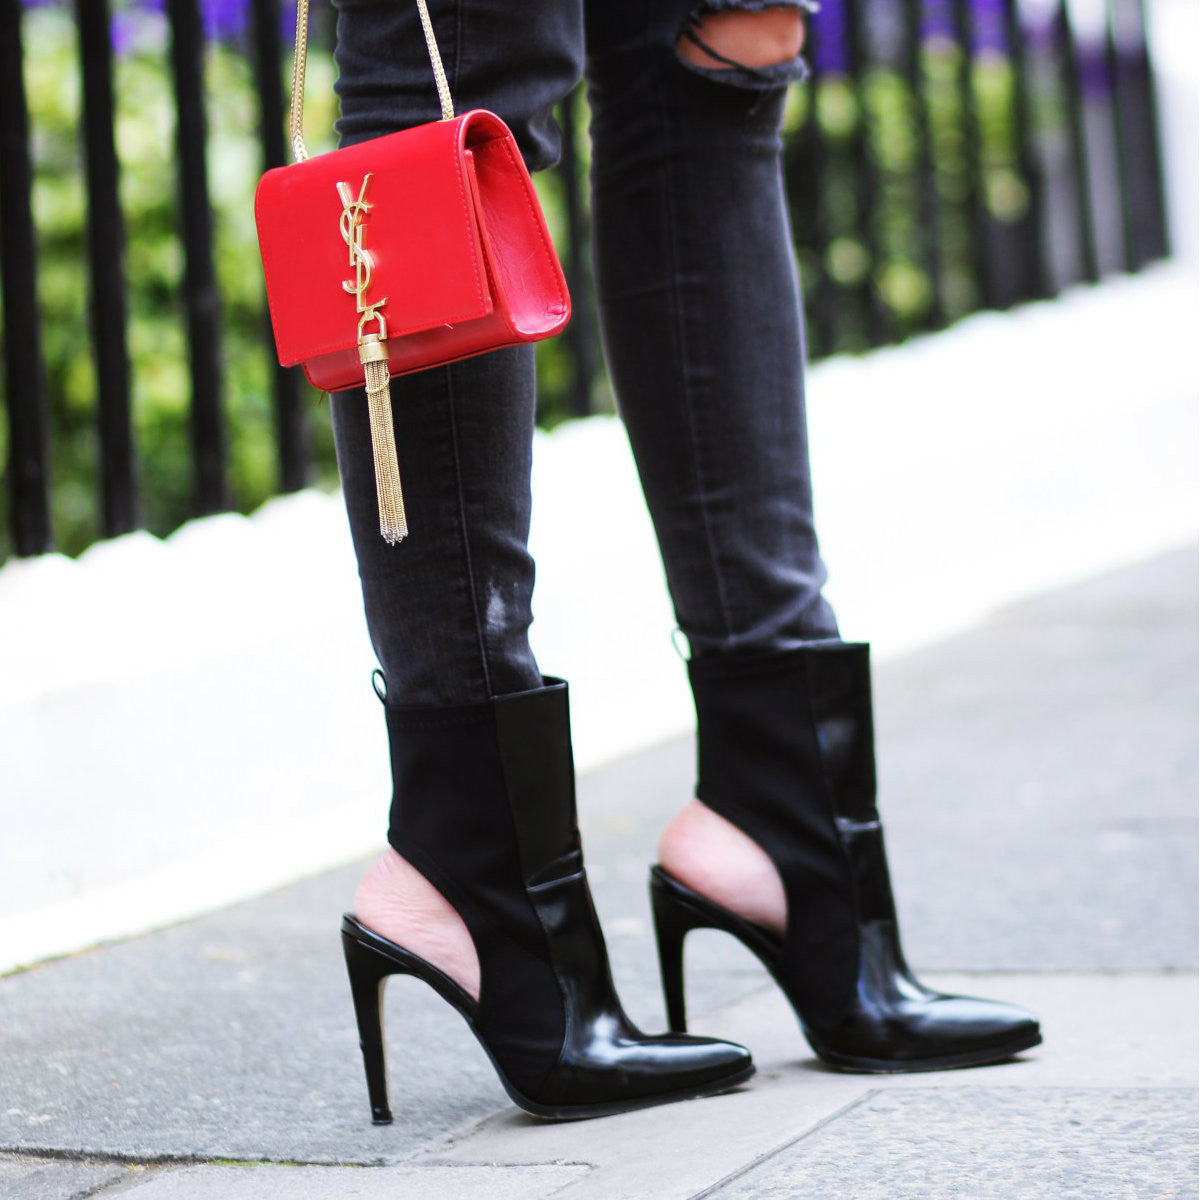 Saskia Stiletto Ankle Boots With Cut Out Heel - Bag Envy